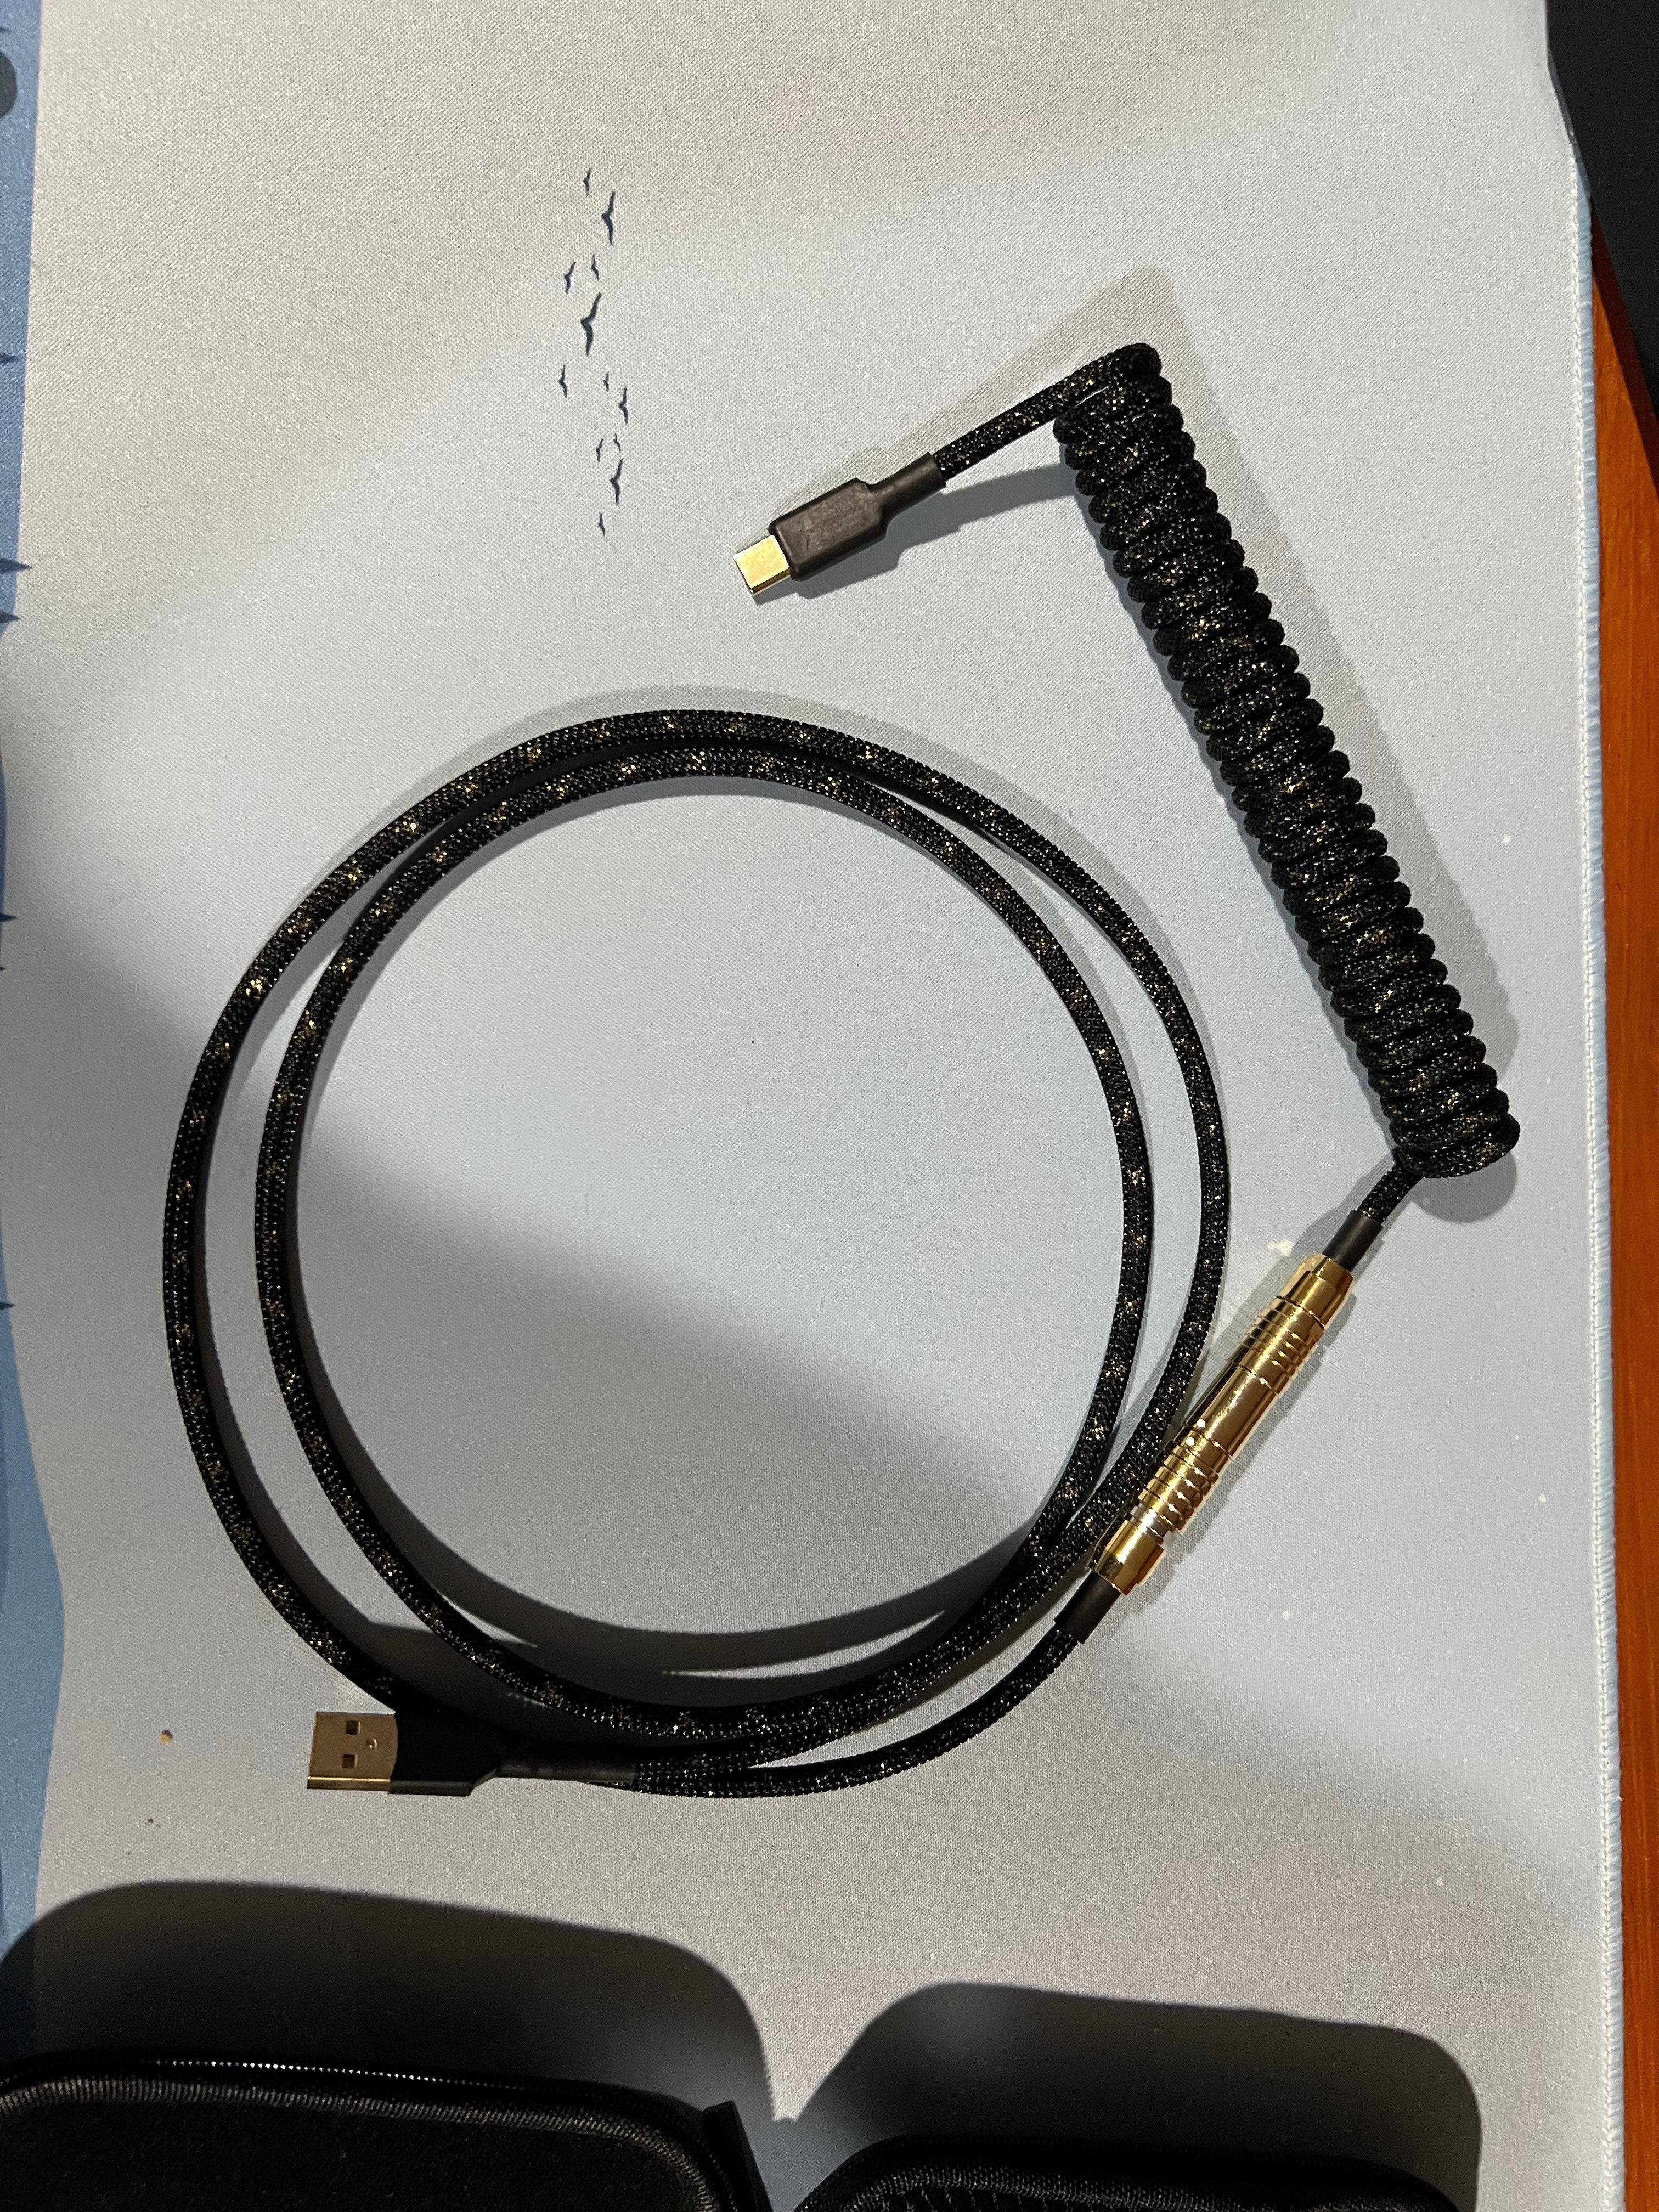 [KFA MARKETPLACE] Mech cables Black & Gold X Premium Push-Pull Cable - KeebsForAll